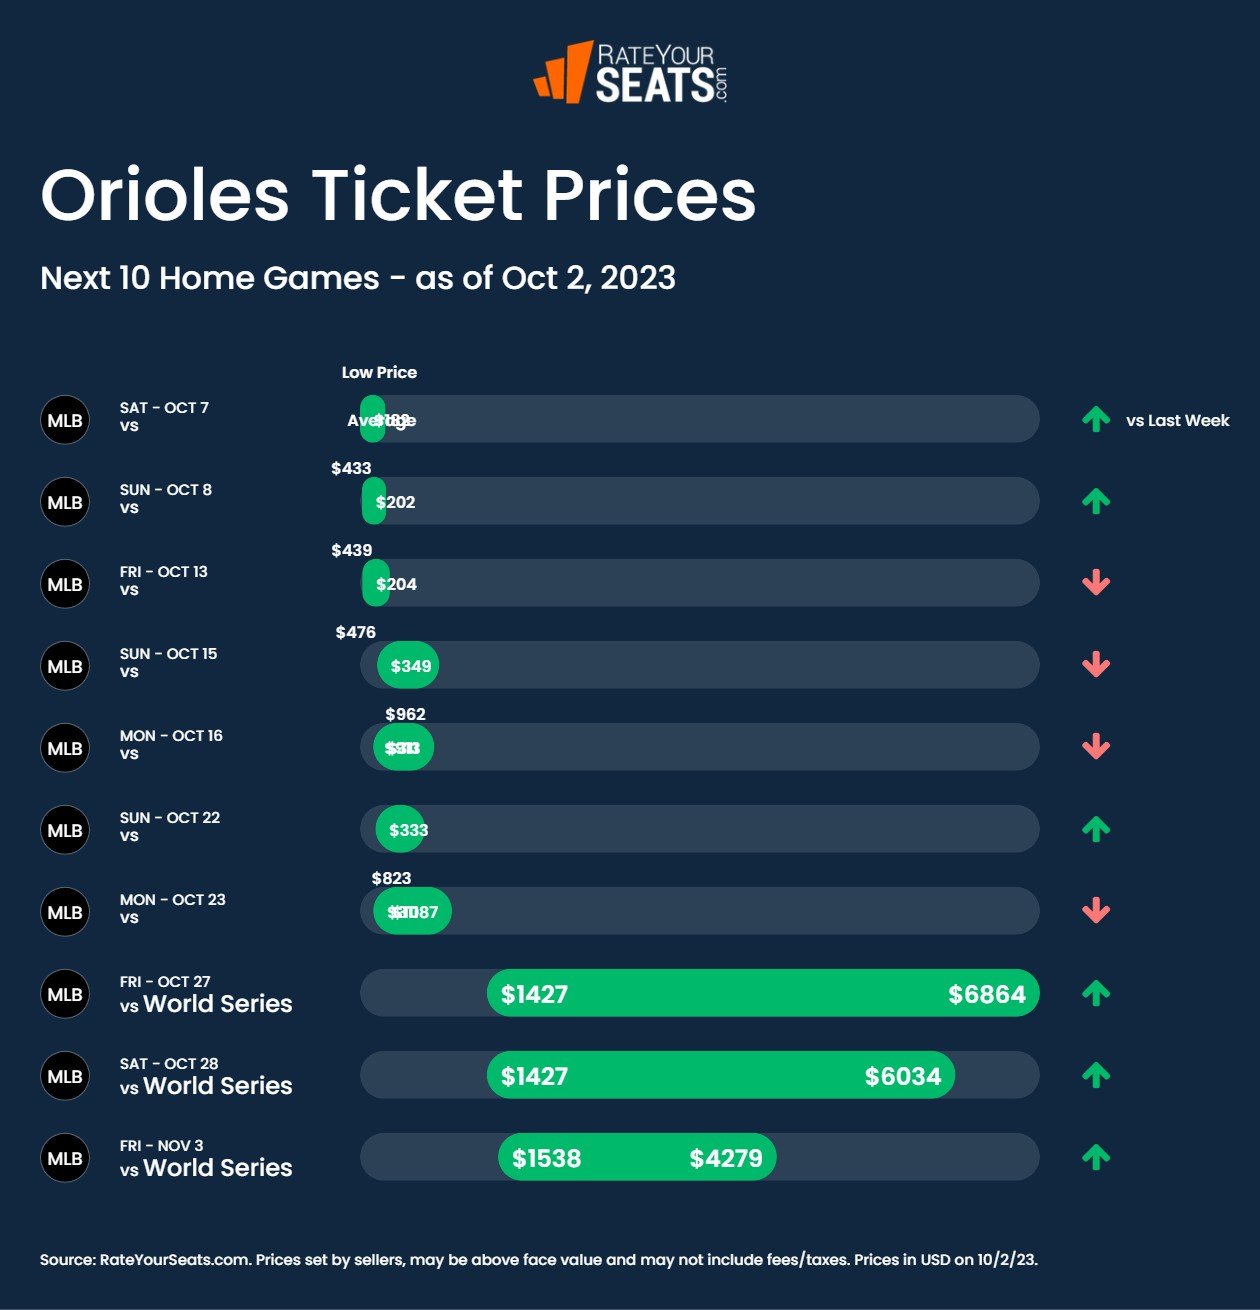 Orioles tickets pricing week of October 2 2023